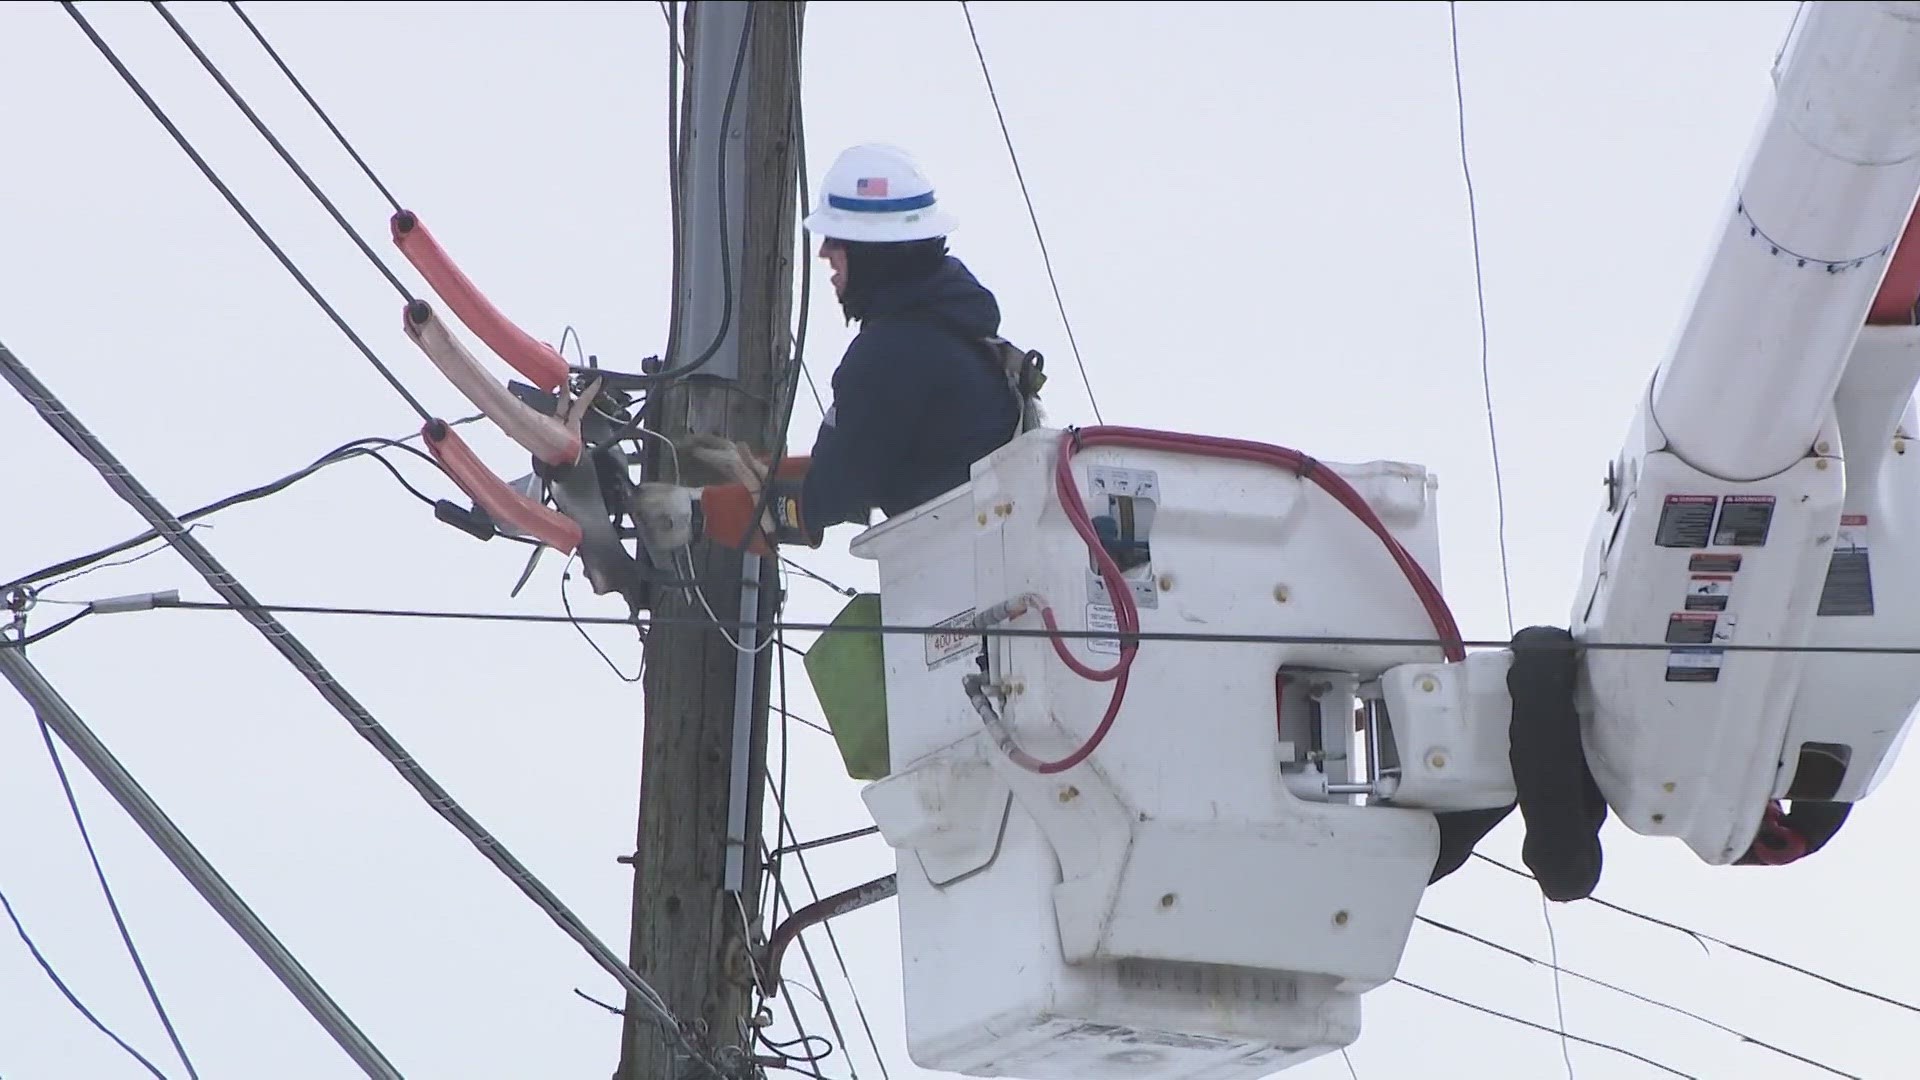 National Grid is asking you to call 911 if you see a power line down in your neighborhood